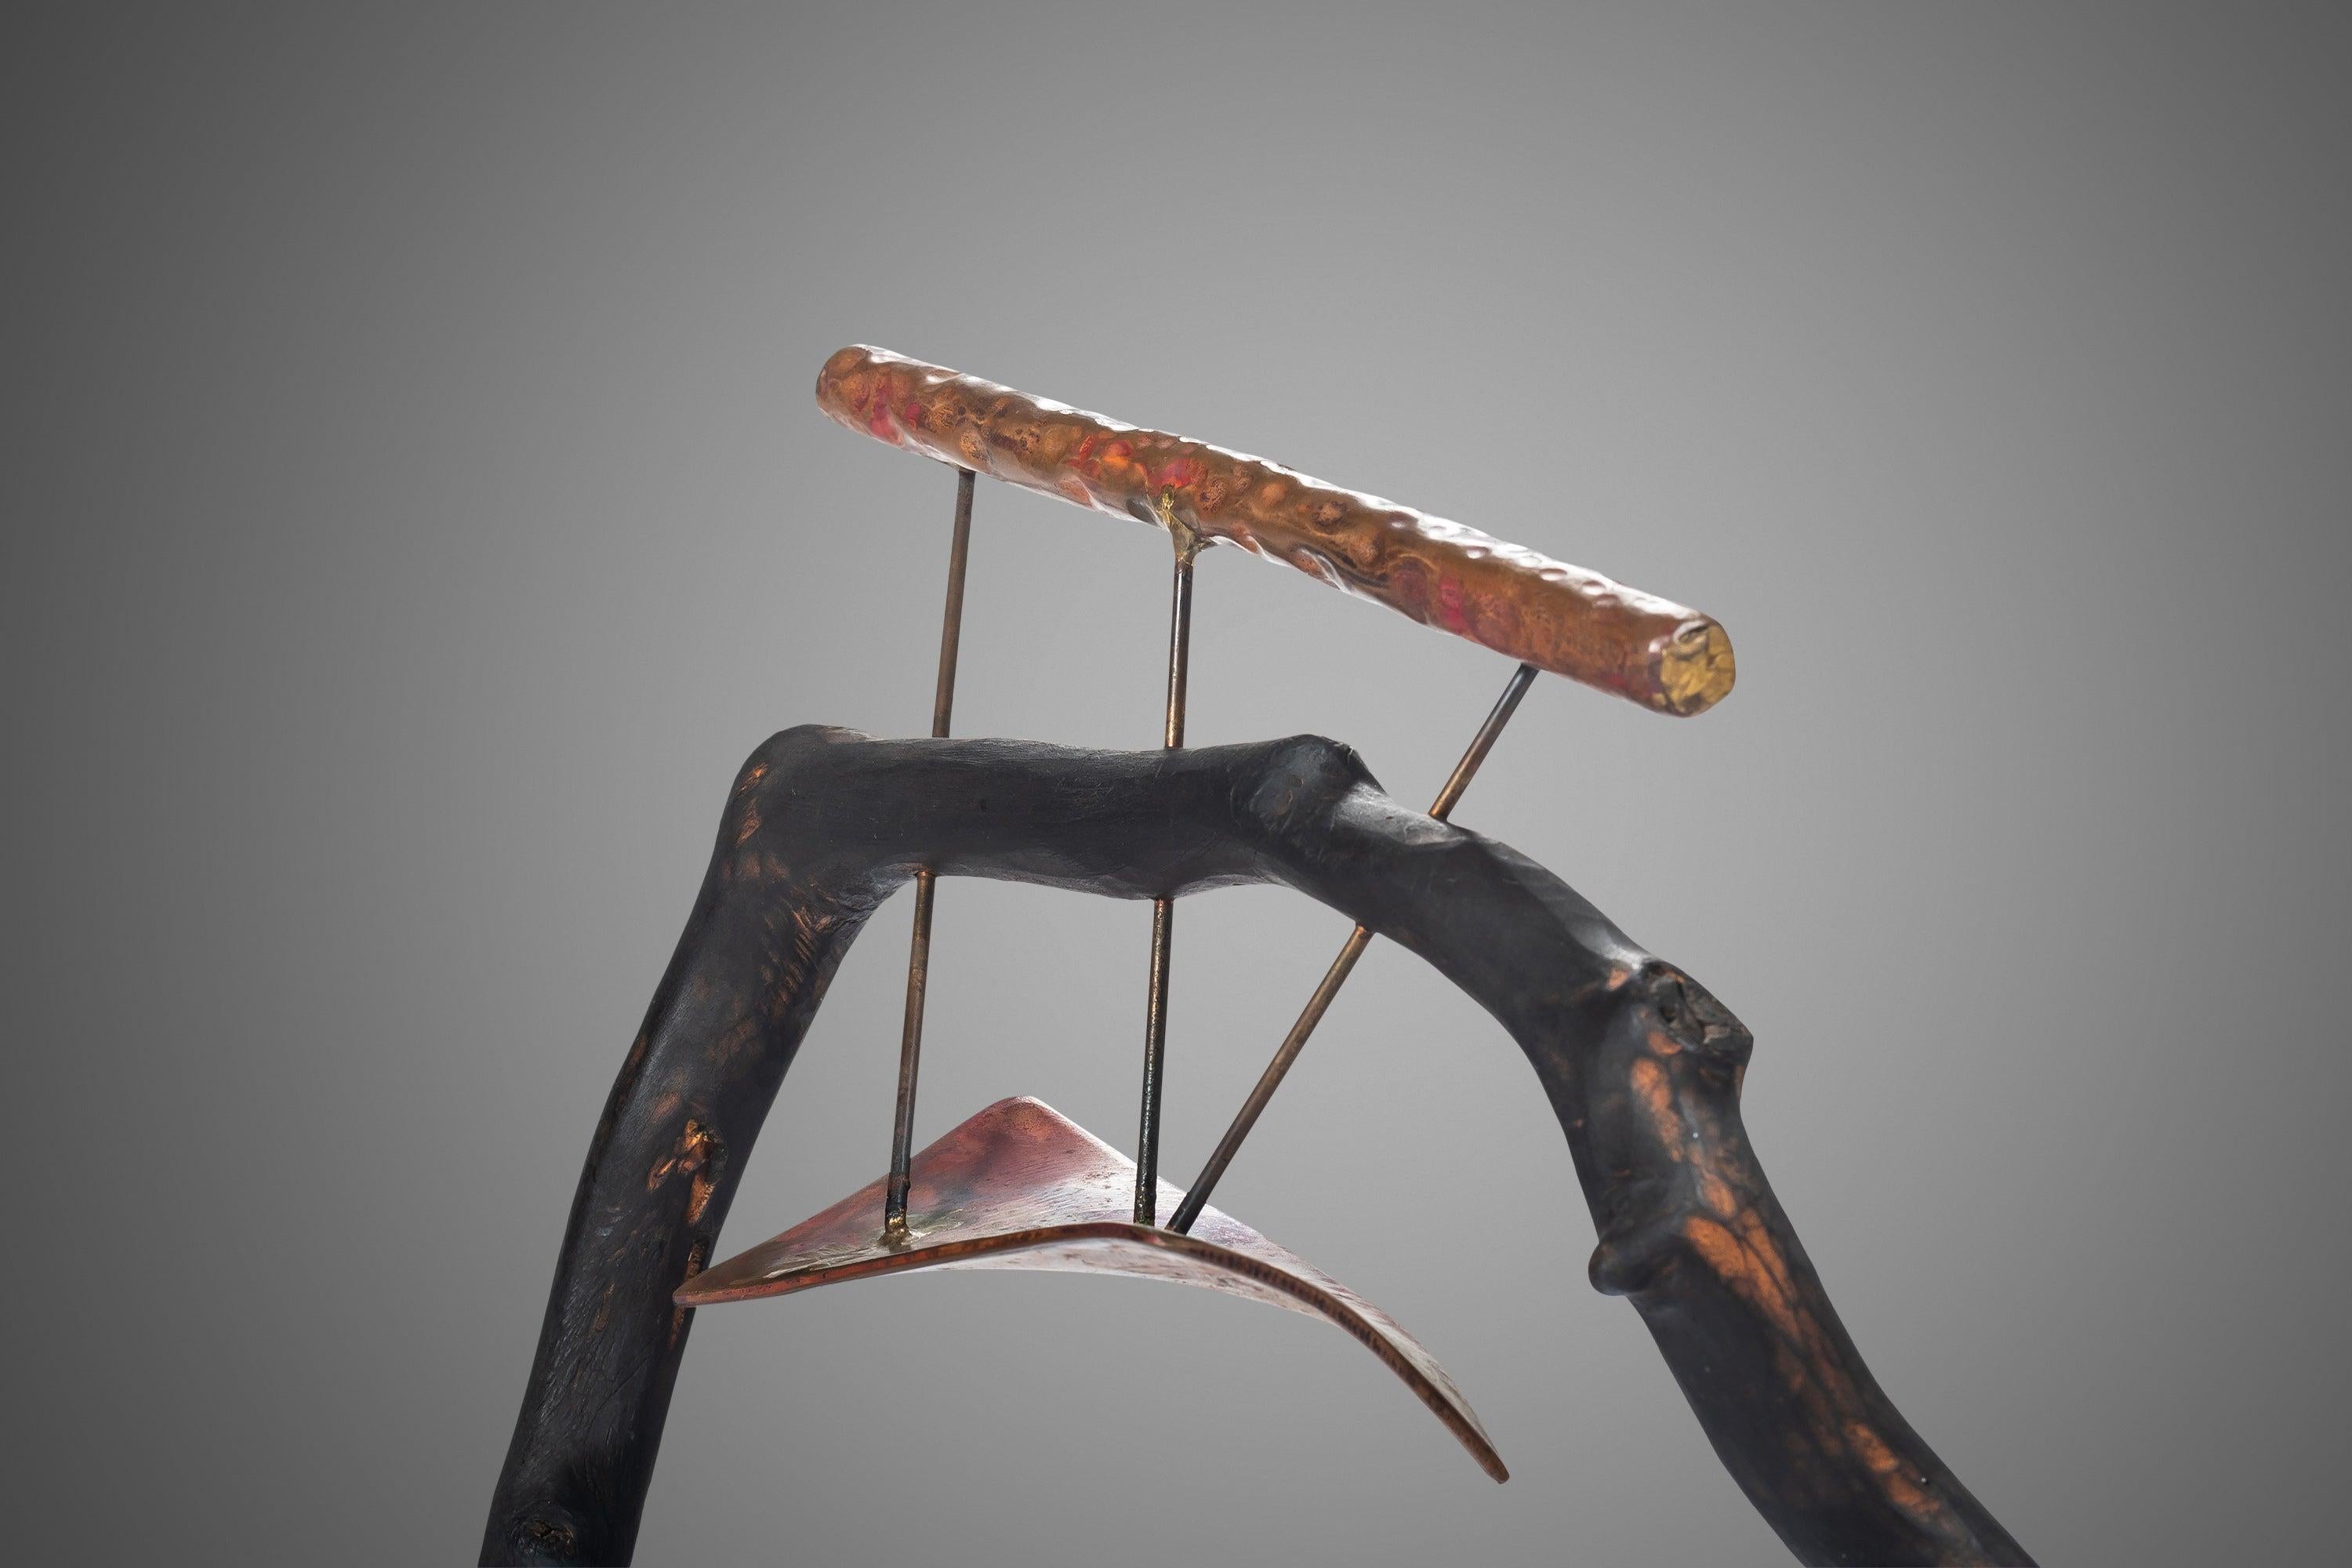 Mid-20th Century Organic Sculptural Art Composed of Ebonized Wood and Patinaed Copper, c. 1960s For Sale